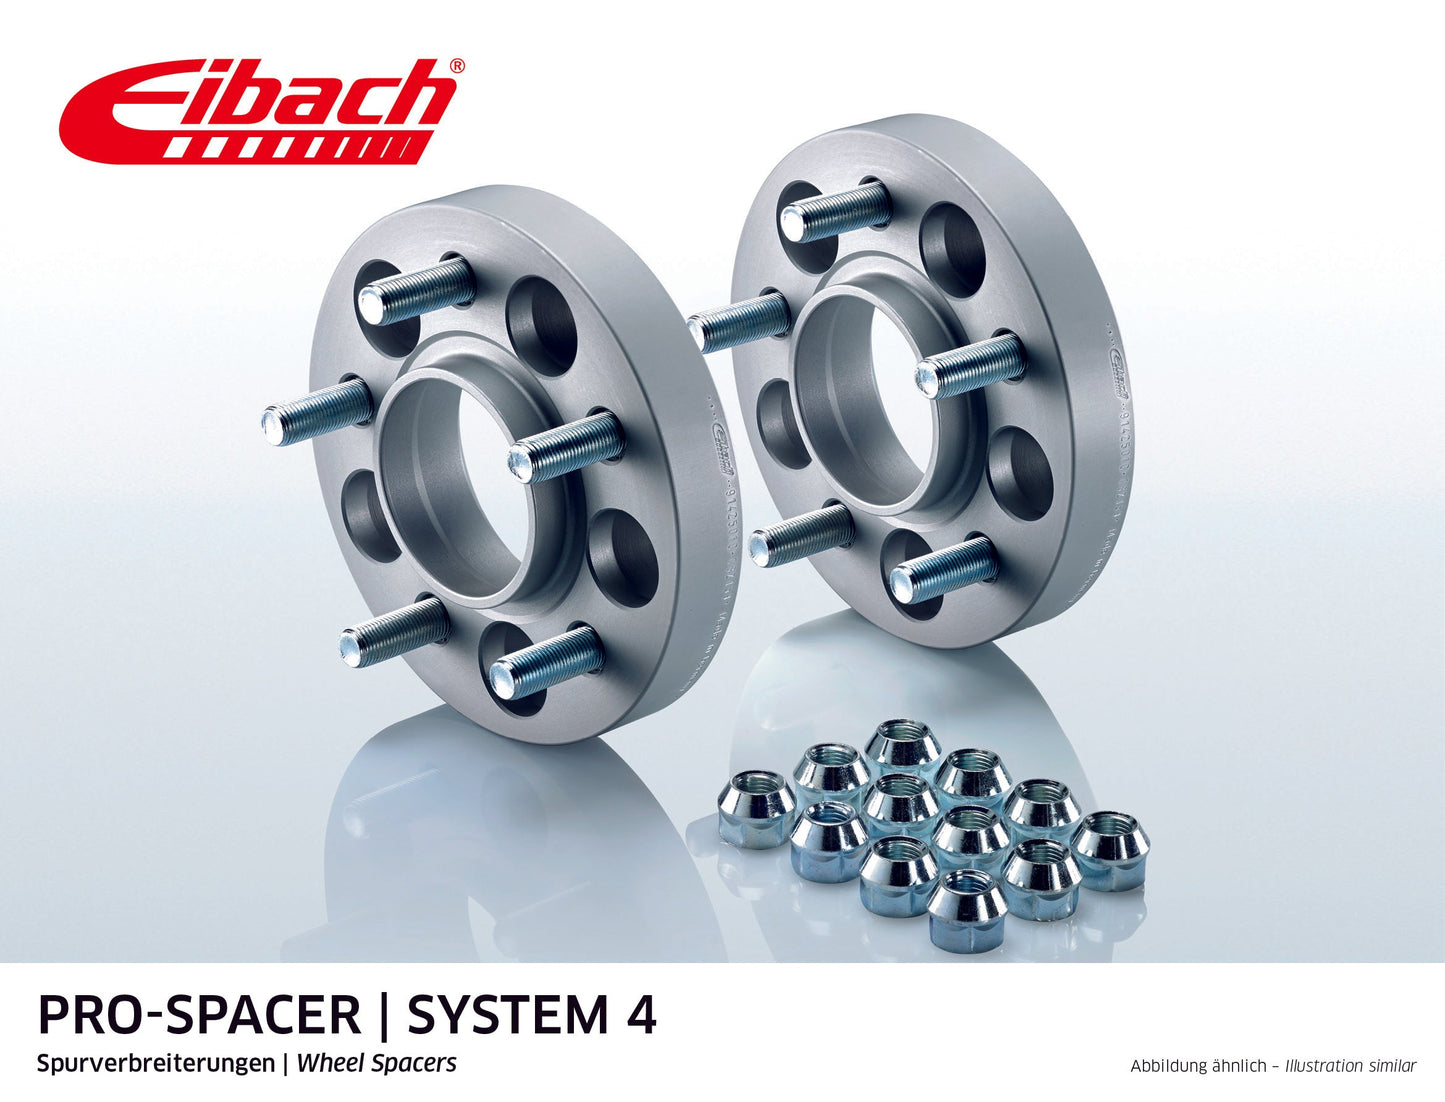 Eibach Pro-Spacer Kit (Pair Of Spacers) 20mm Per Spacer (System 4) S90-4-20-024 (Silver) at £159.79